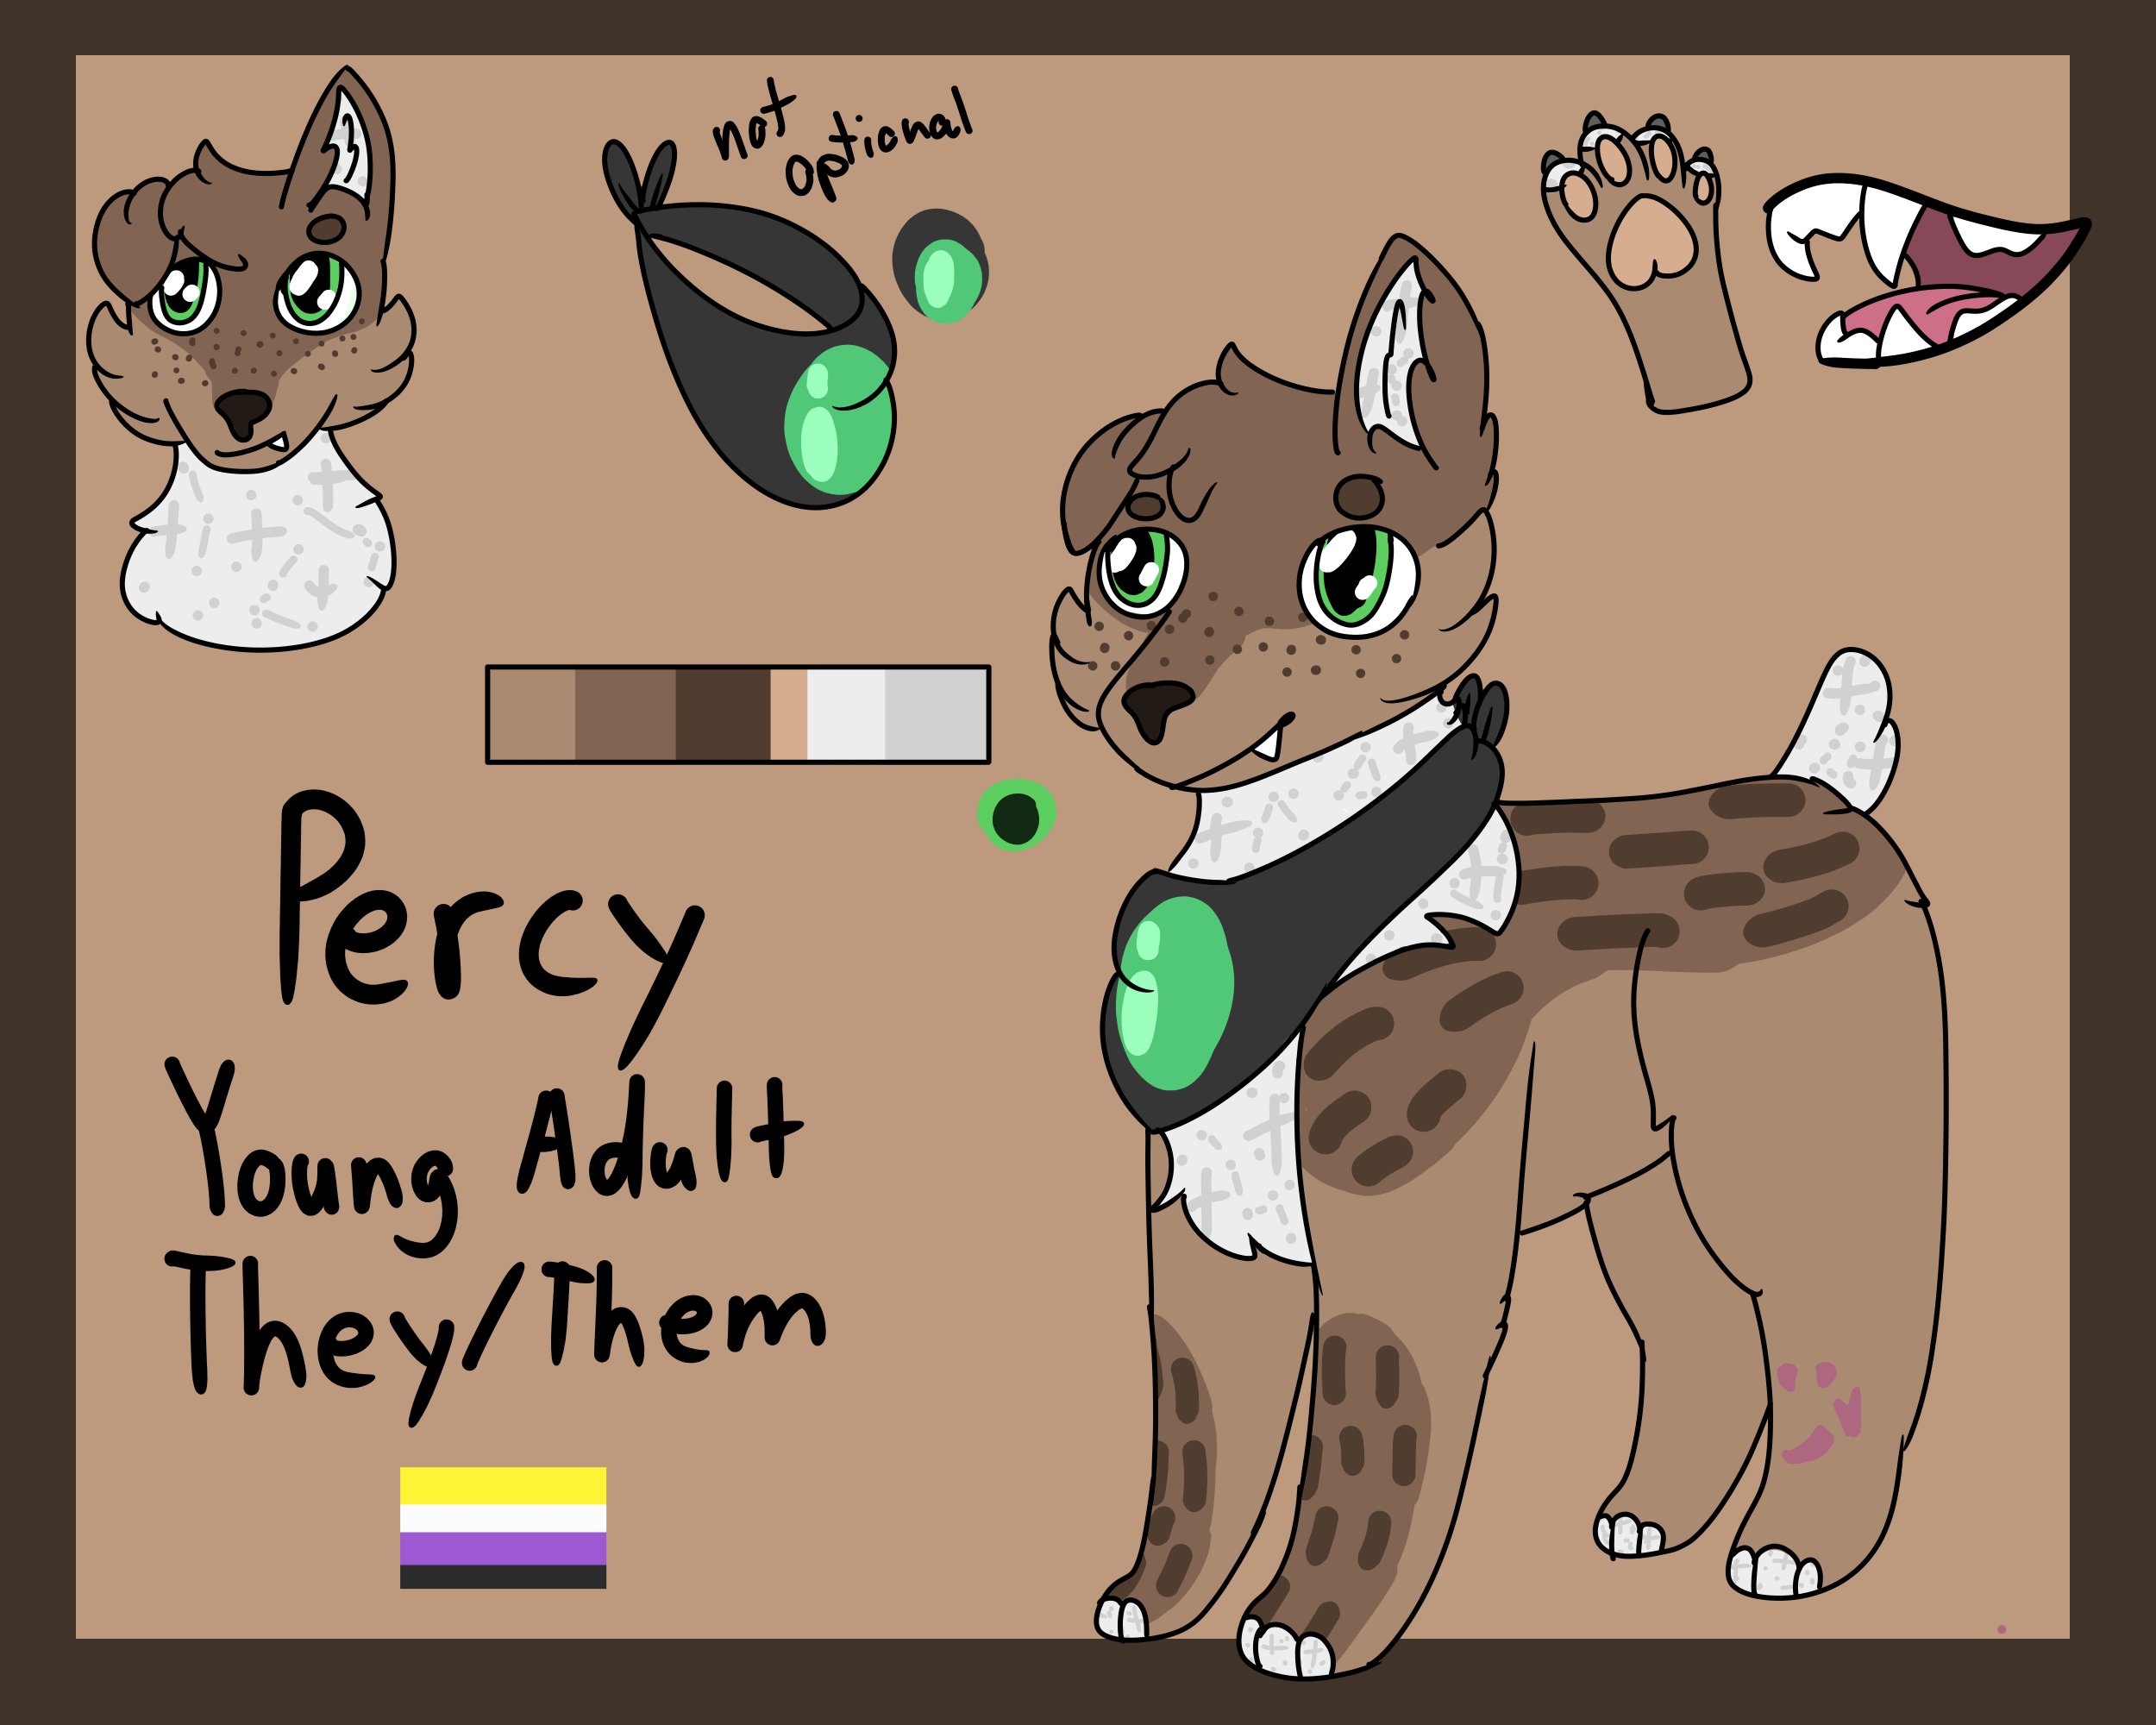 Percy-ref1.png